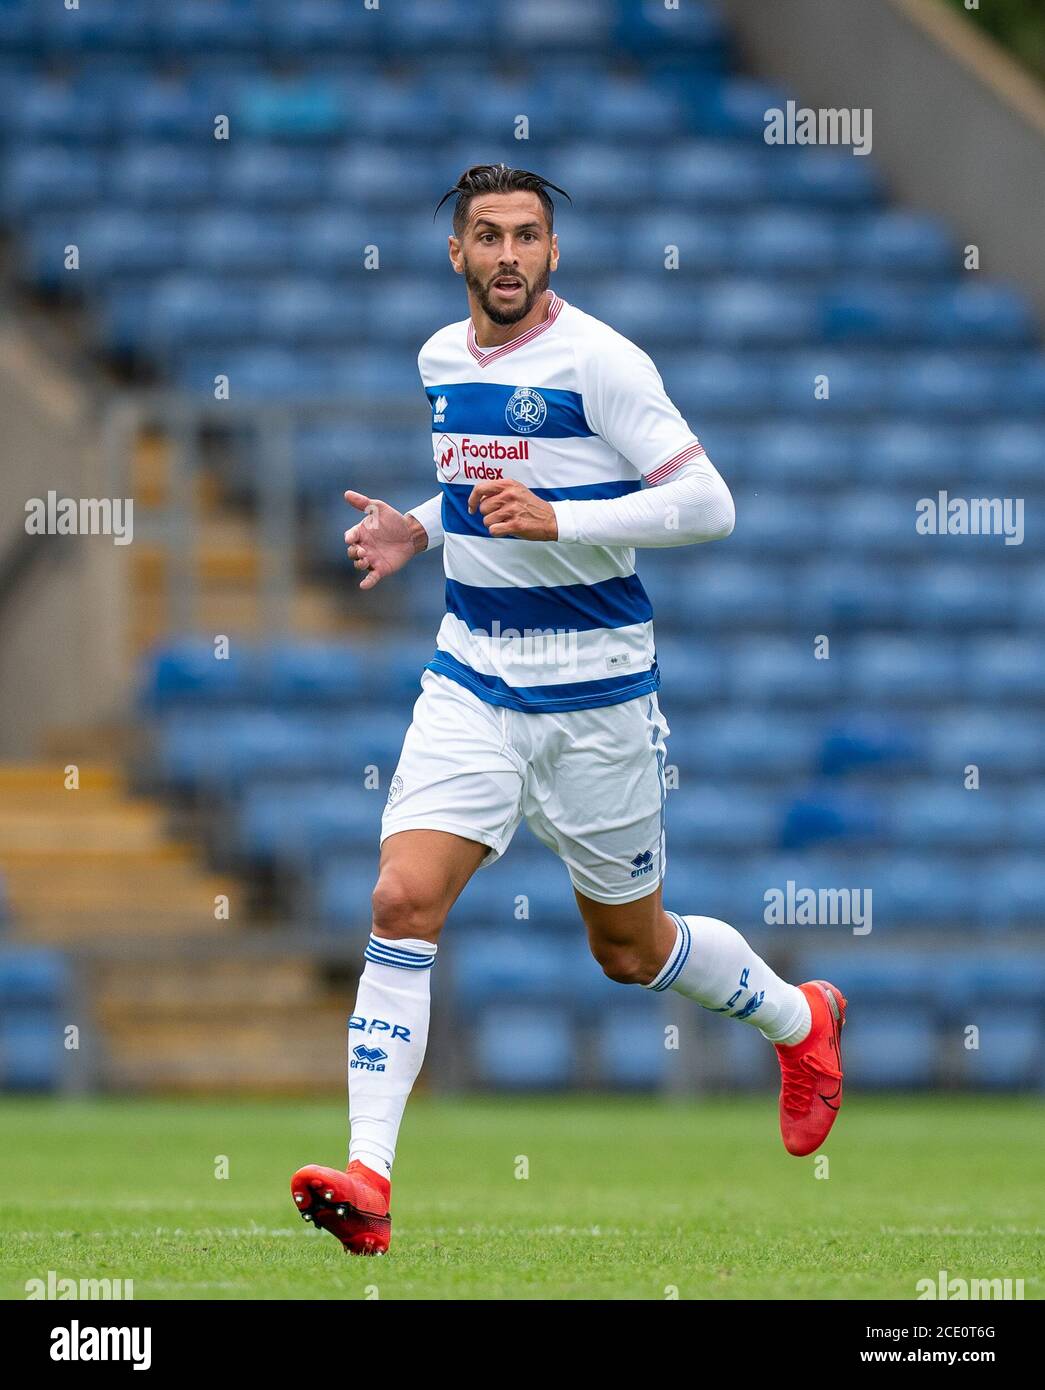 Oxford, UK. 29th Aug, 2020. Geoff Cameron of QPR during the 2020/21 behind closed doors Pre Season Friendly match between Oxford United and Queens Park Rangers at the Kassam Stadium, Oxford, England on 29 August 2020. Photo by Andy Rowland. Credit: PRiME Media Images/Alamy Live News Stock Photo